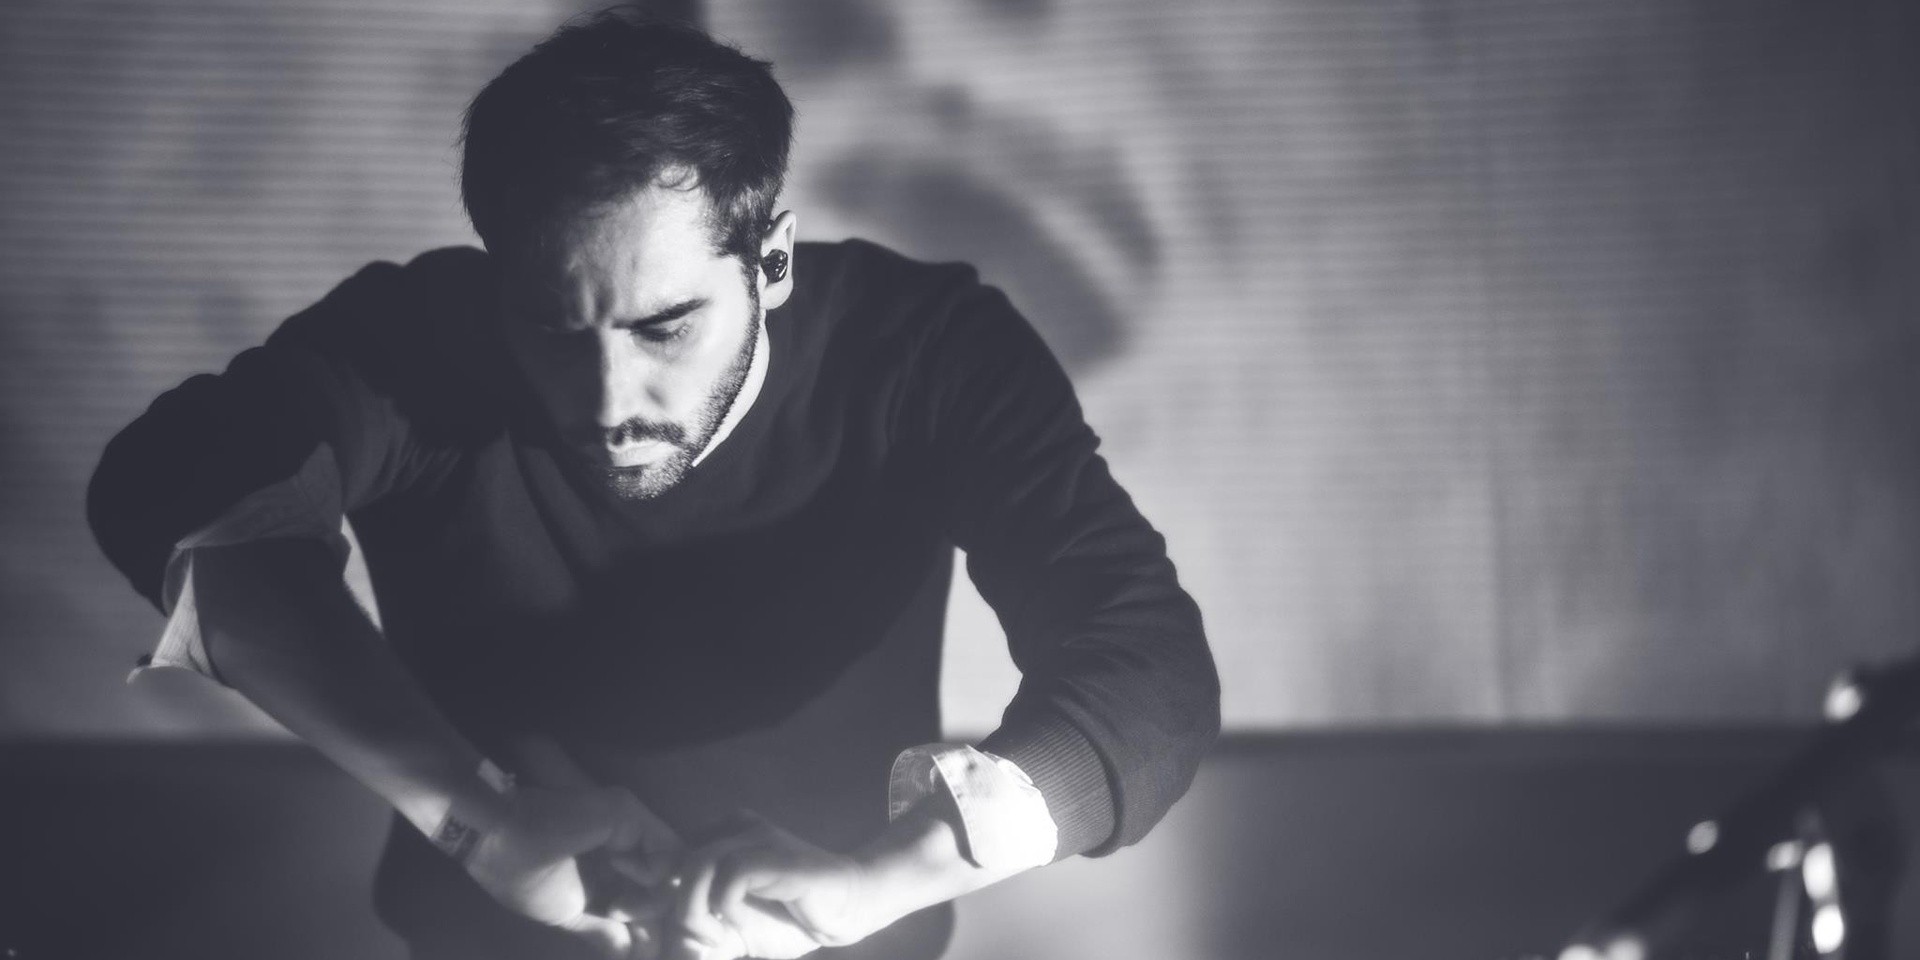 French electronic maestros Saycet and Anoraak take over Kult Kafe this April